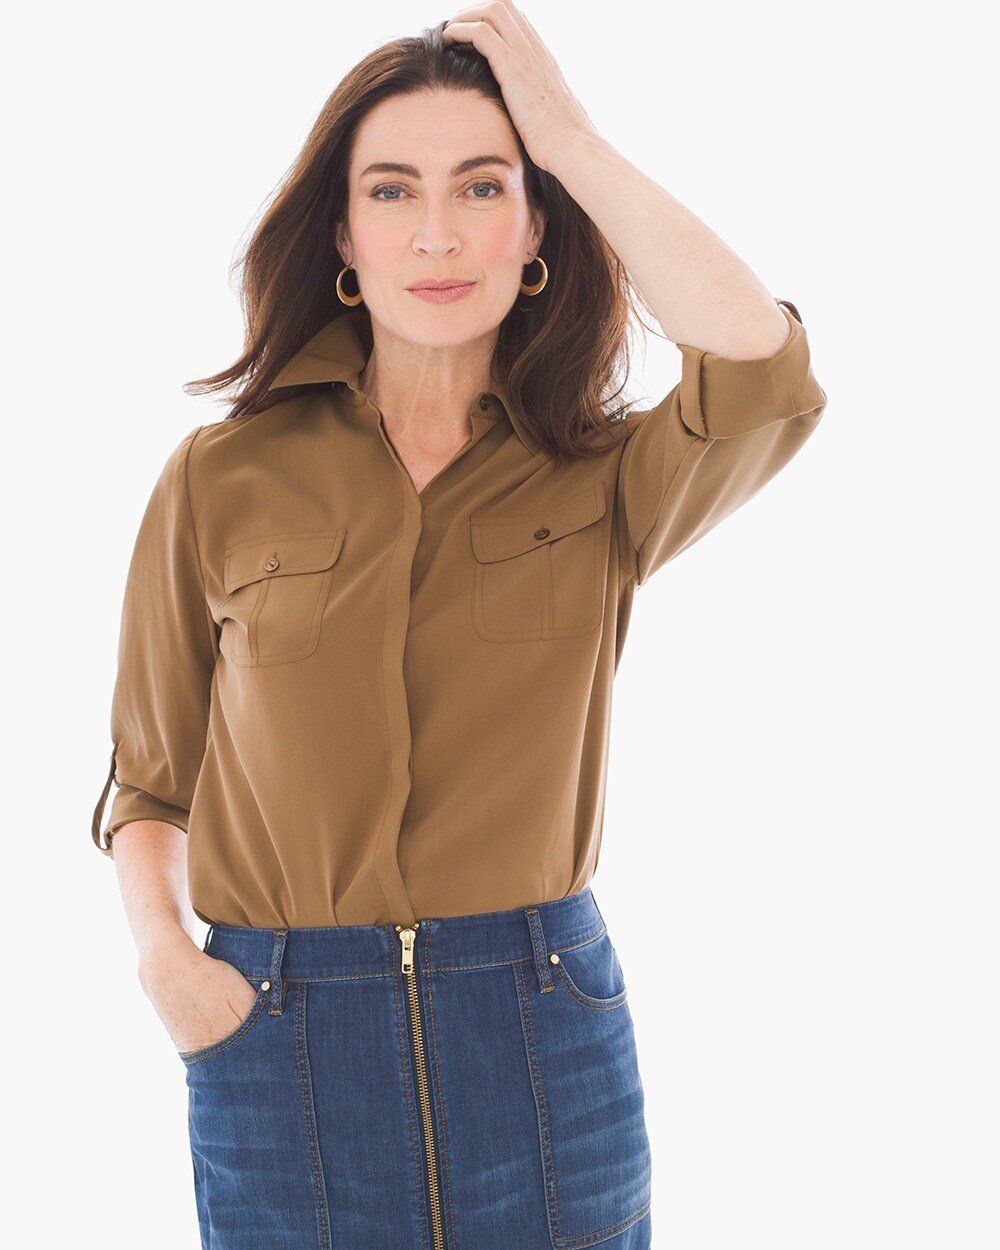 Silky Soft Classic Shirt video preview image, click to start video